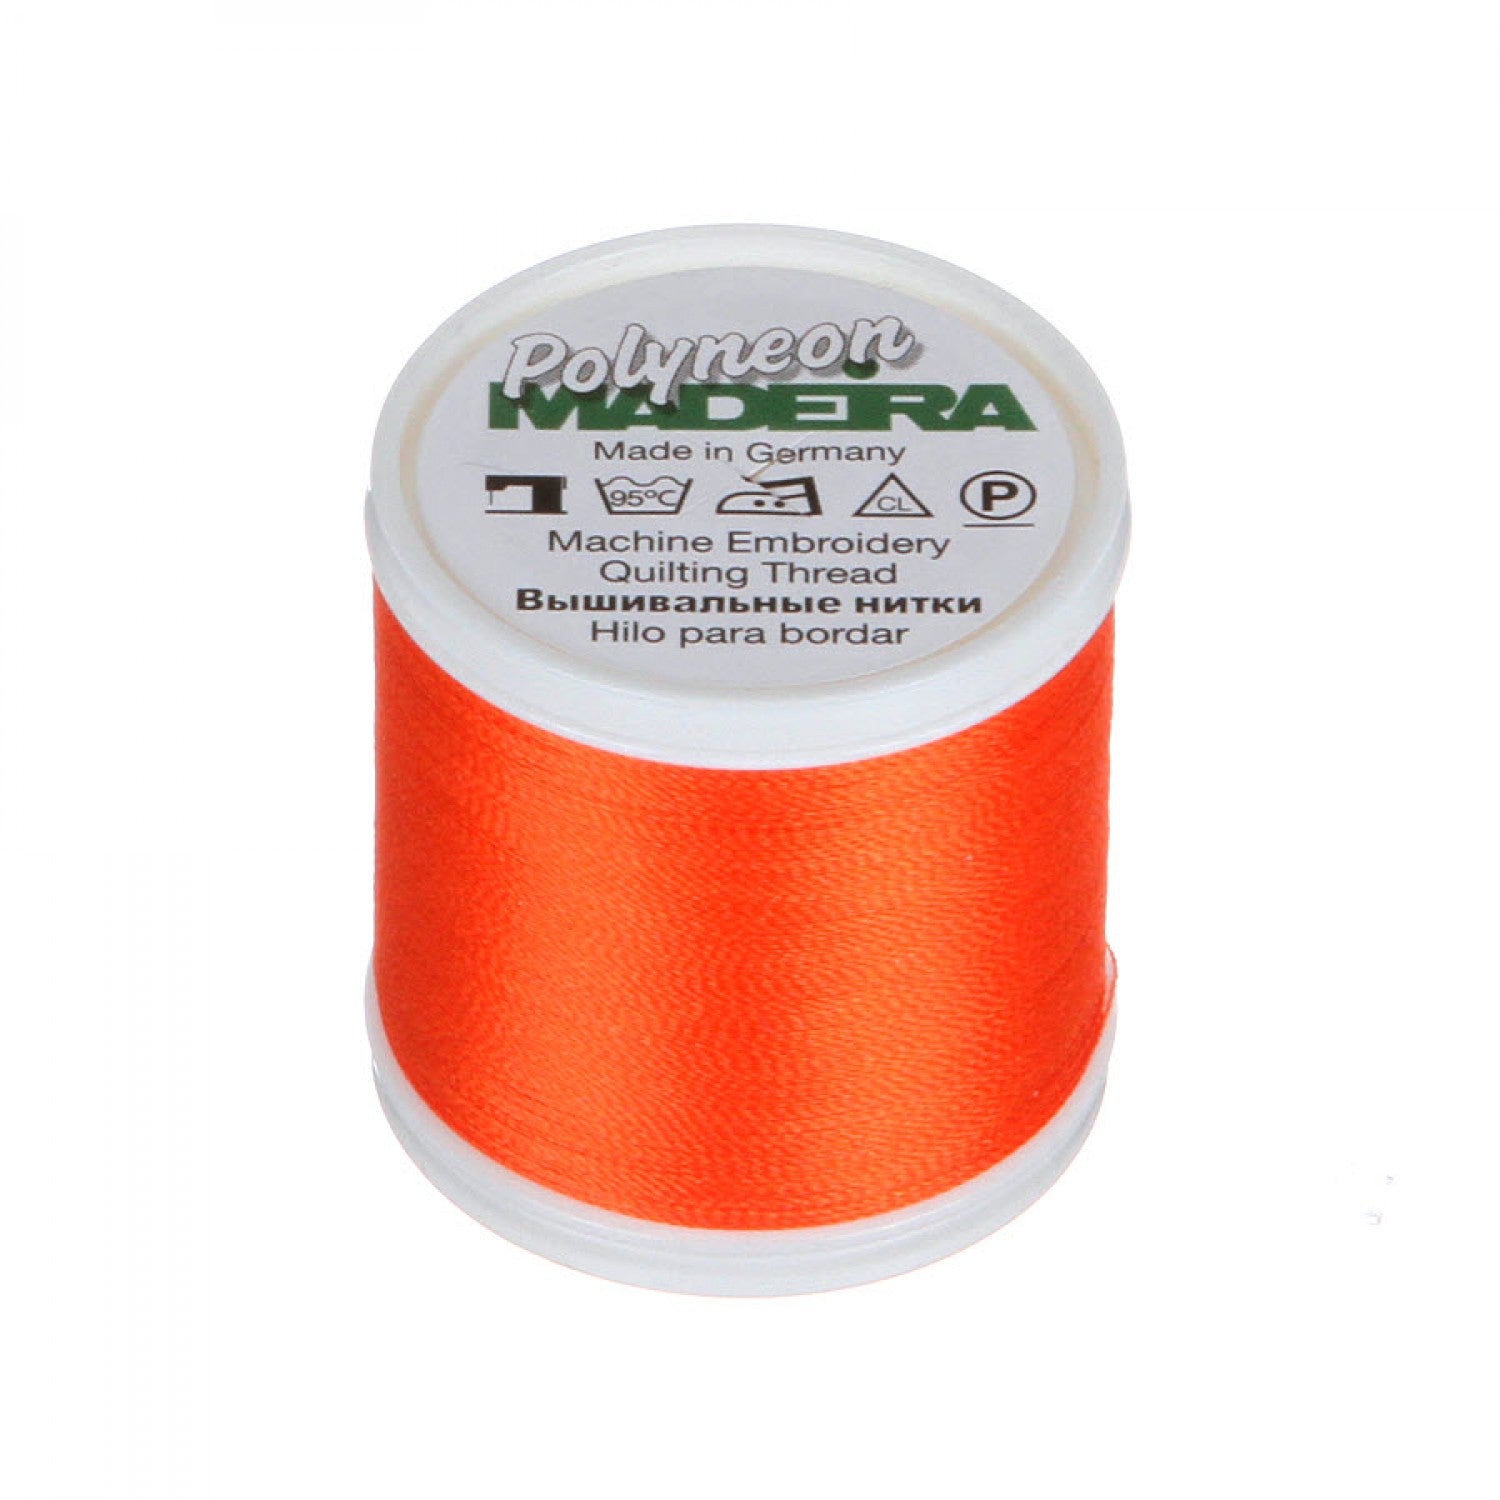 Pumpkin Orange Color -- Ref. # 1678 -- Polyneon Machine Embroidery Thread -- (#40 / #60 Weights), Various Sizes by MADEIRA